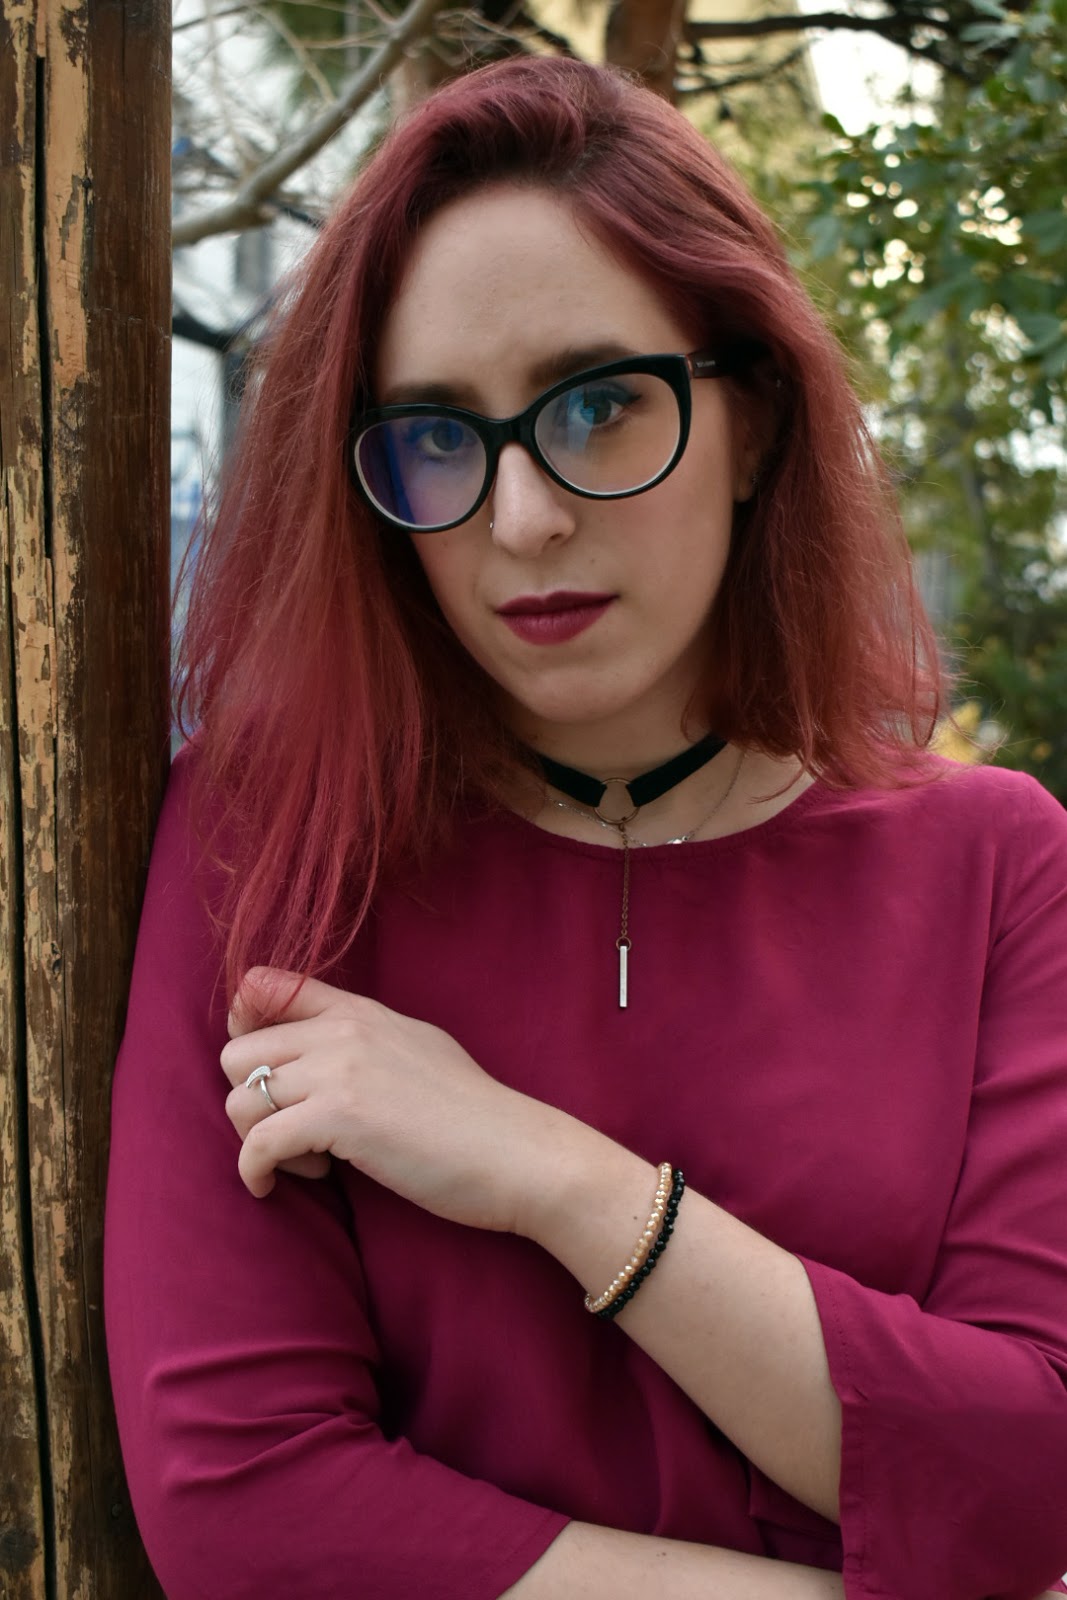 spotlights on badwolf, anna keni, anna, fashion, makeup, redhead,glasses, girl with glasses, Bad Wolf,fashion blogger,greek girl, greek fashion blogger, dress, magenta, h&m, spring,collection, trends, black, over the knee boots, otk, otkb, 